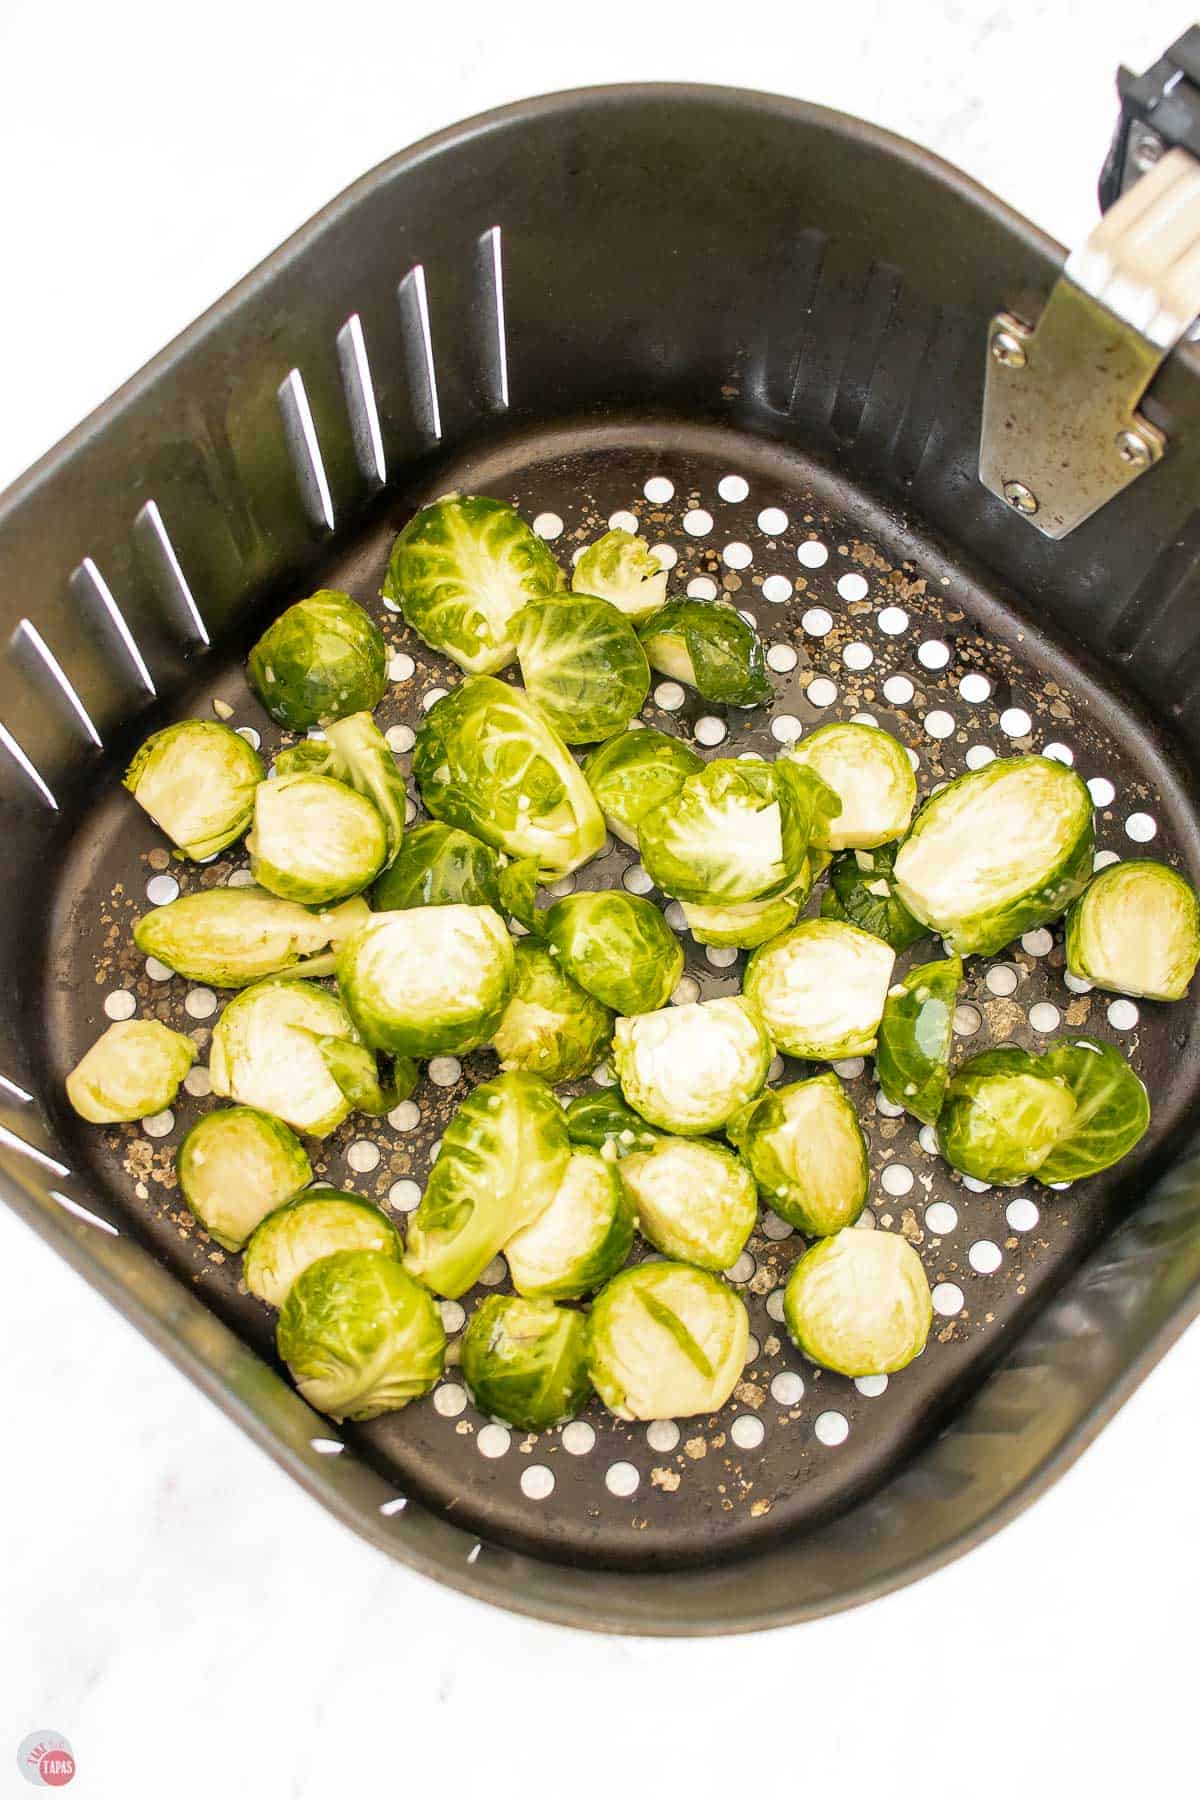 uncooked sprouts in an air fryer basket